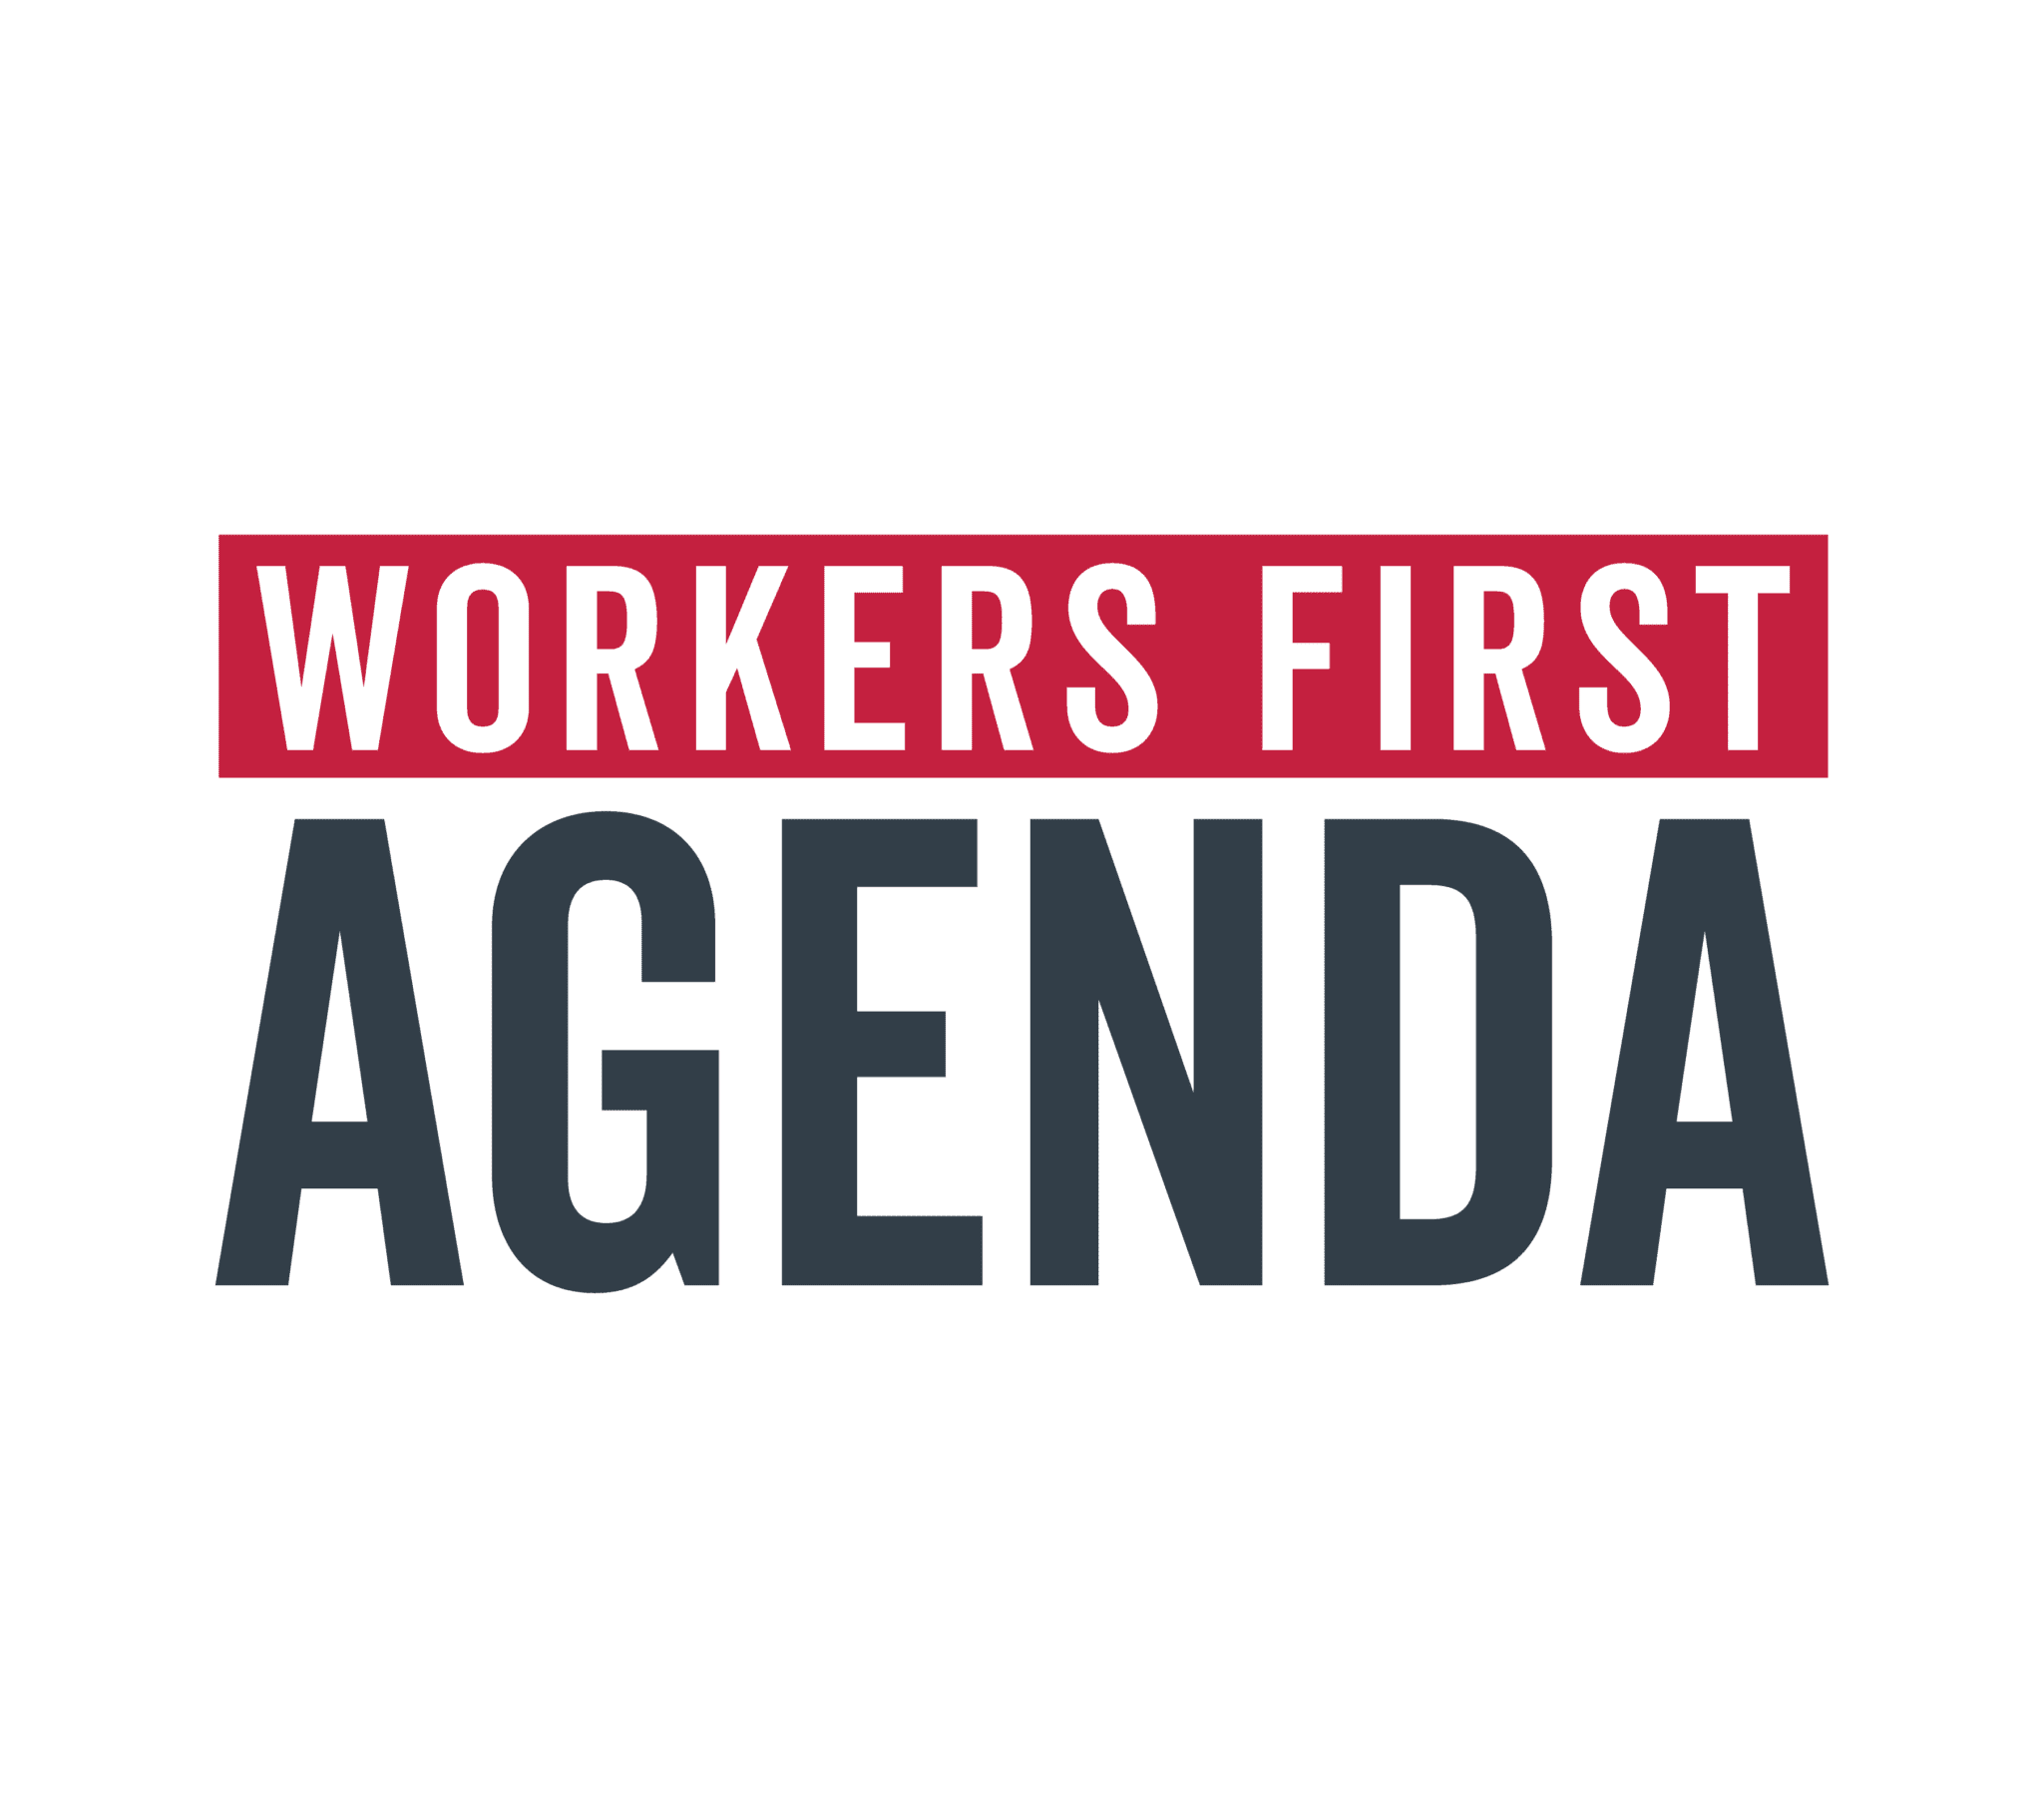 Workers First Agenda